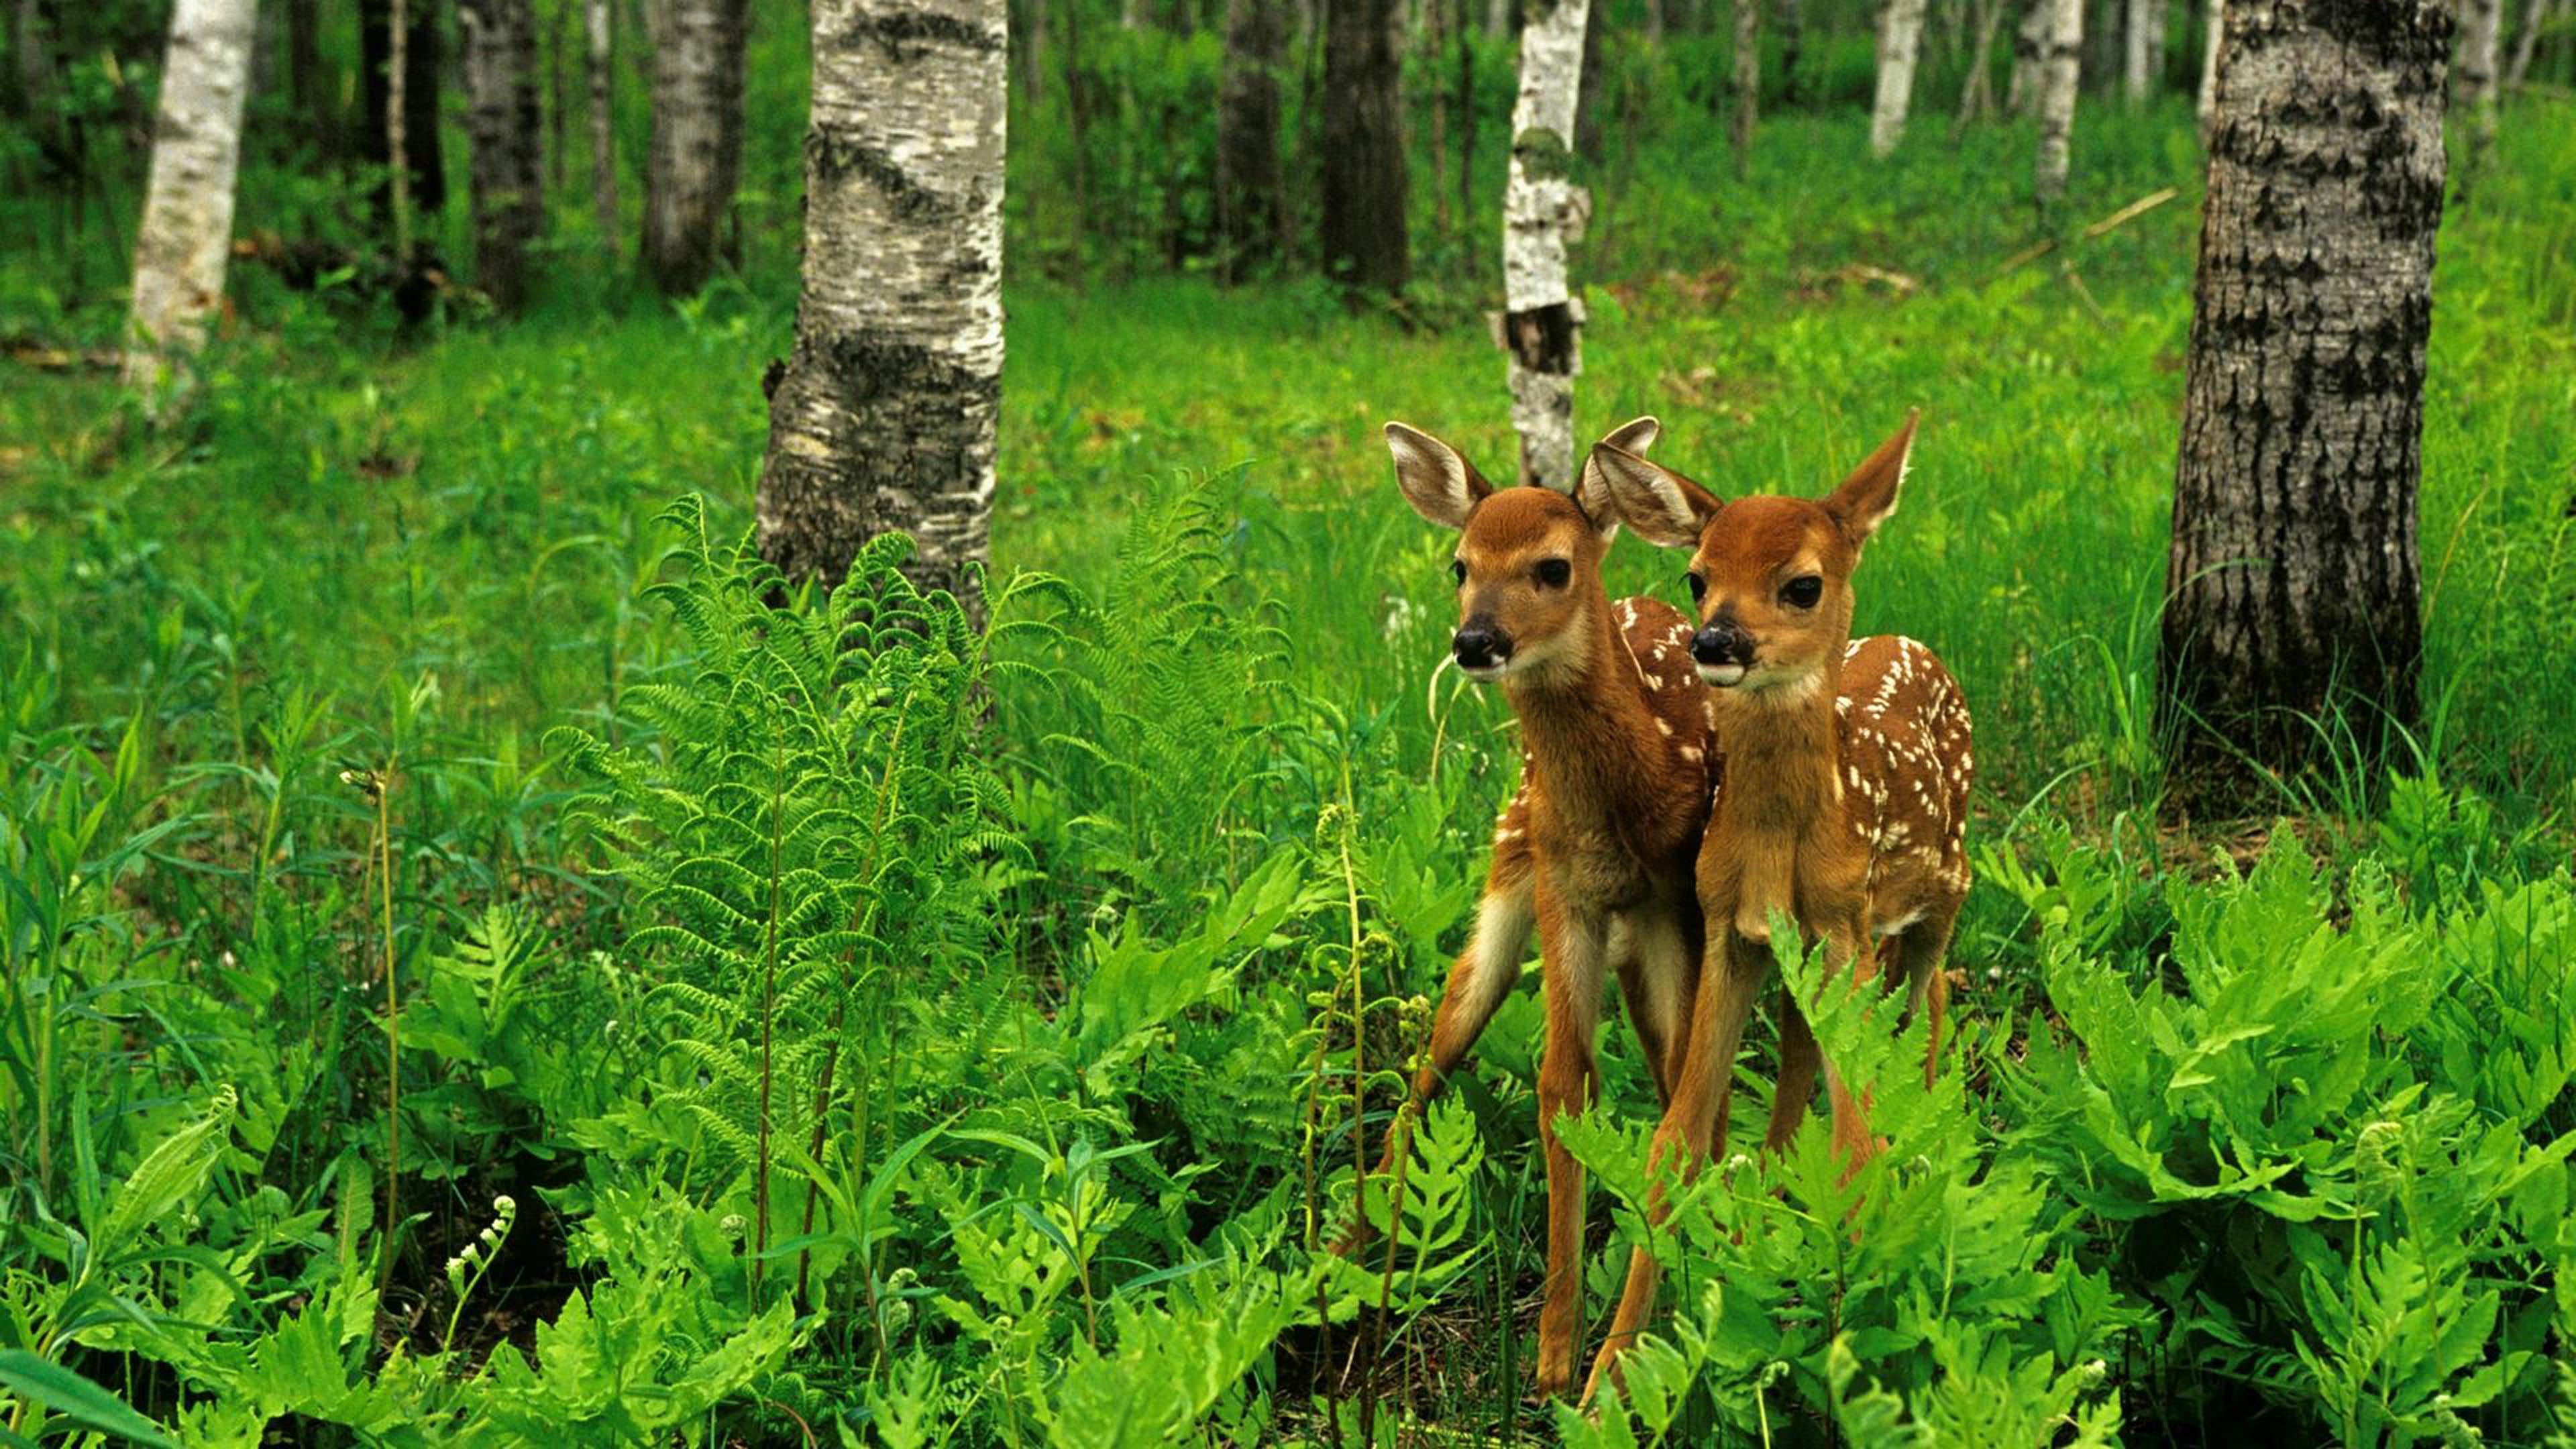 Pygmalion Slange pludselig Wild Animals Deer Nature Forest Trees Green Grass Hd Wallpapers3840x2160 :  Wallpapers13.com